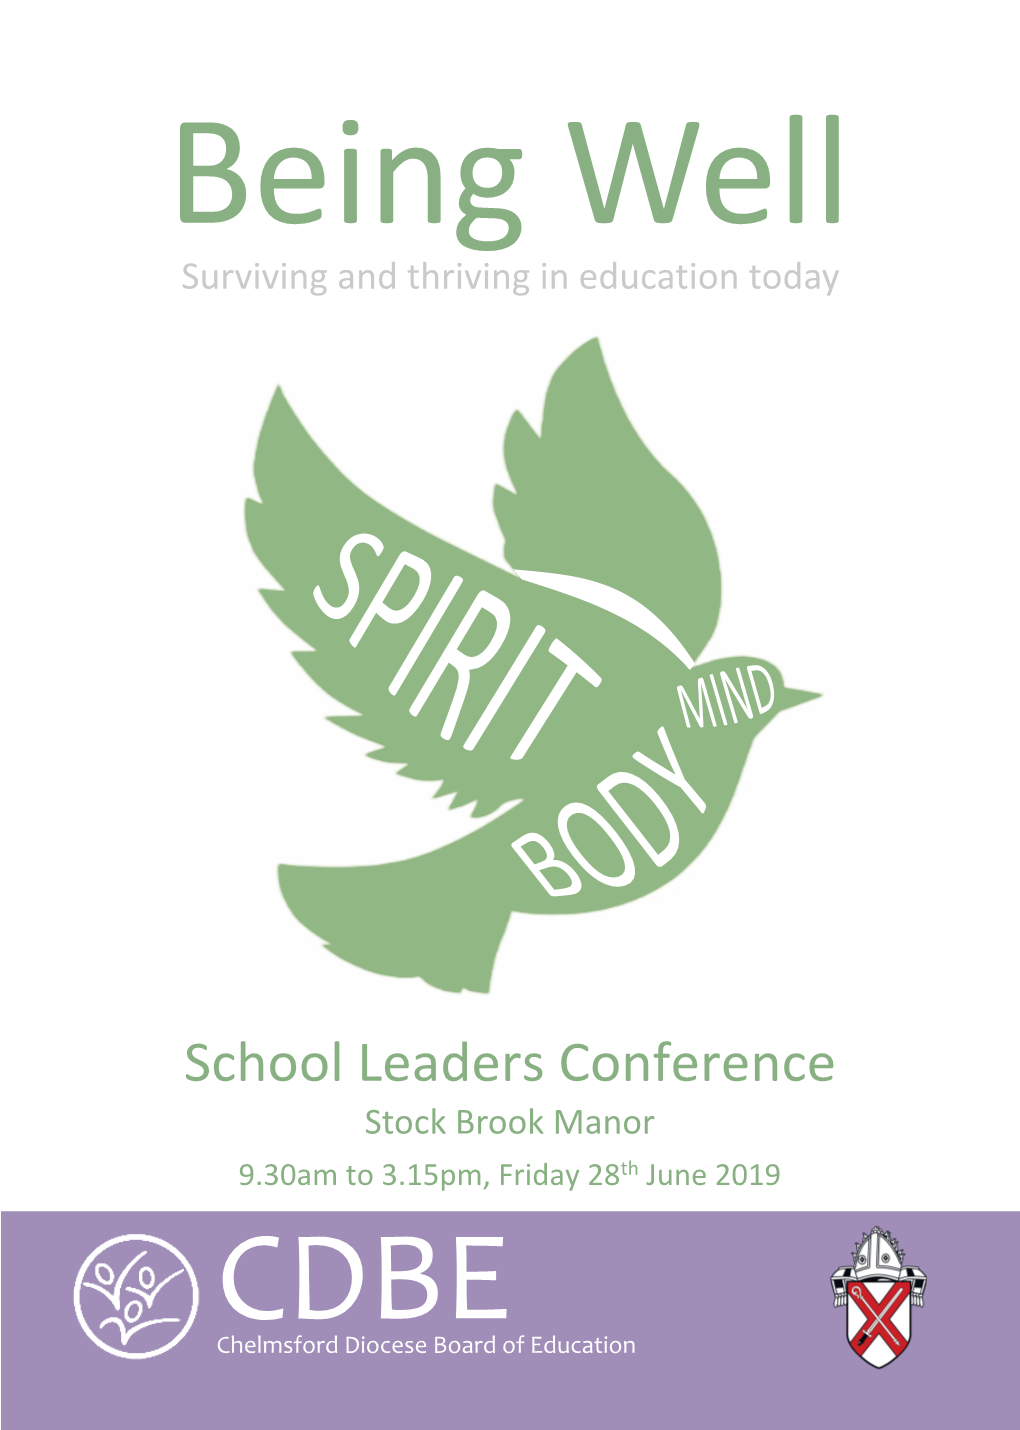 School Leaders Conference 2019